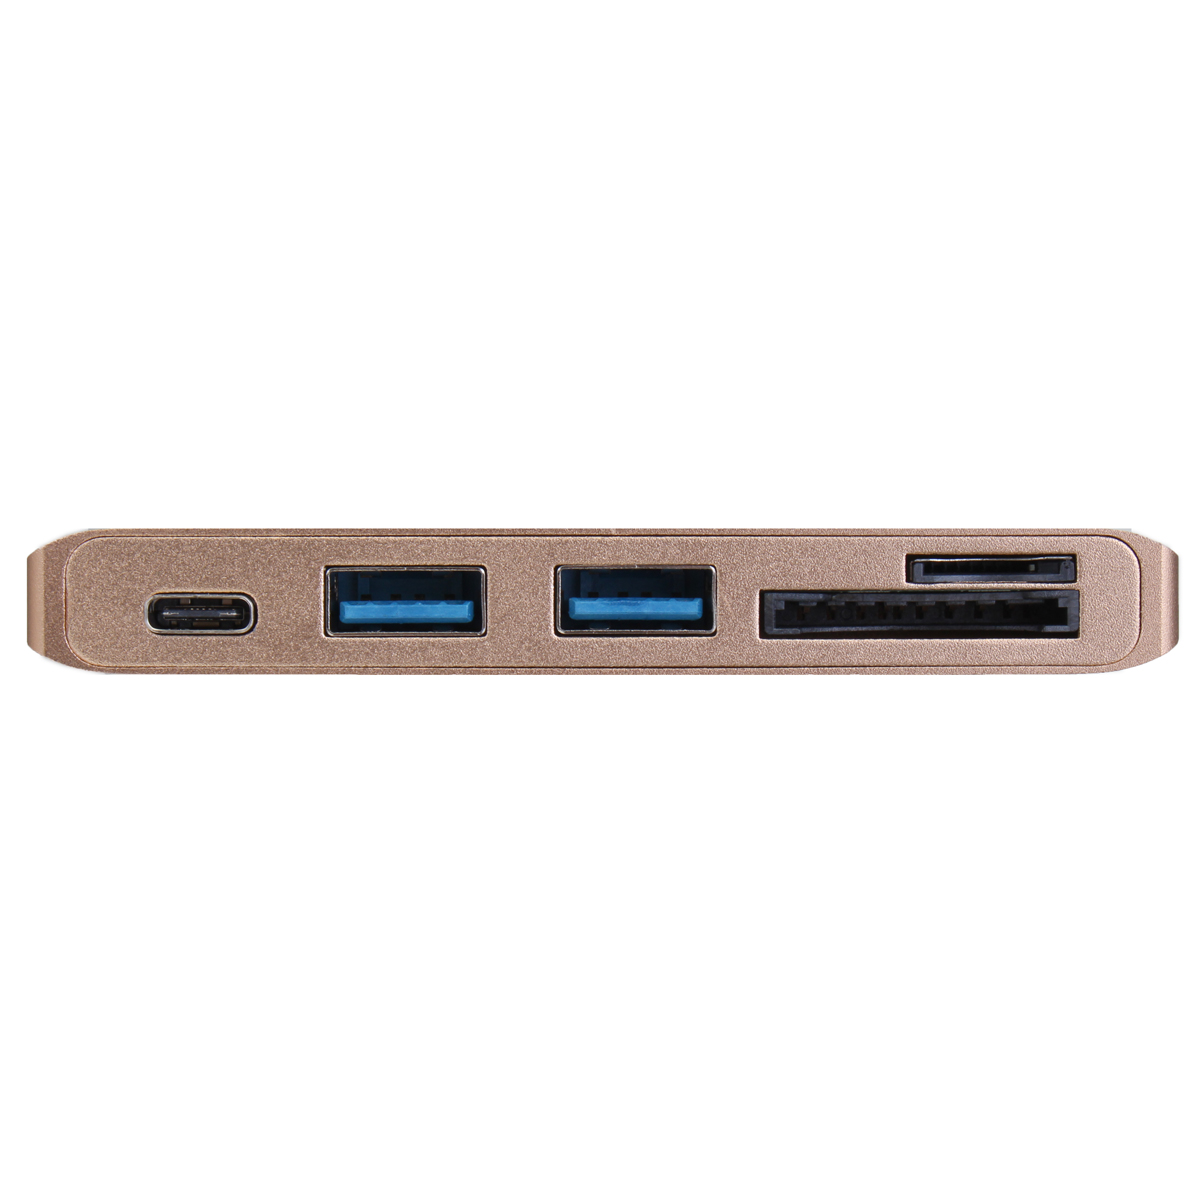 Multifunction USB Hub Type-C to Type-C USB 3.0 2Ports TF SD Card Reader for Laptop PC 15